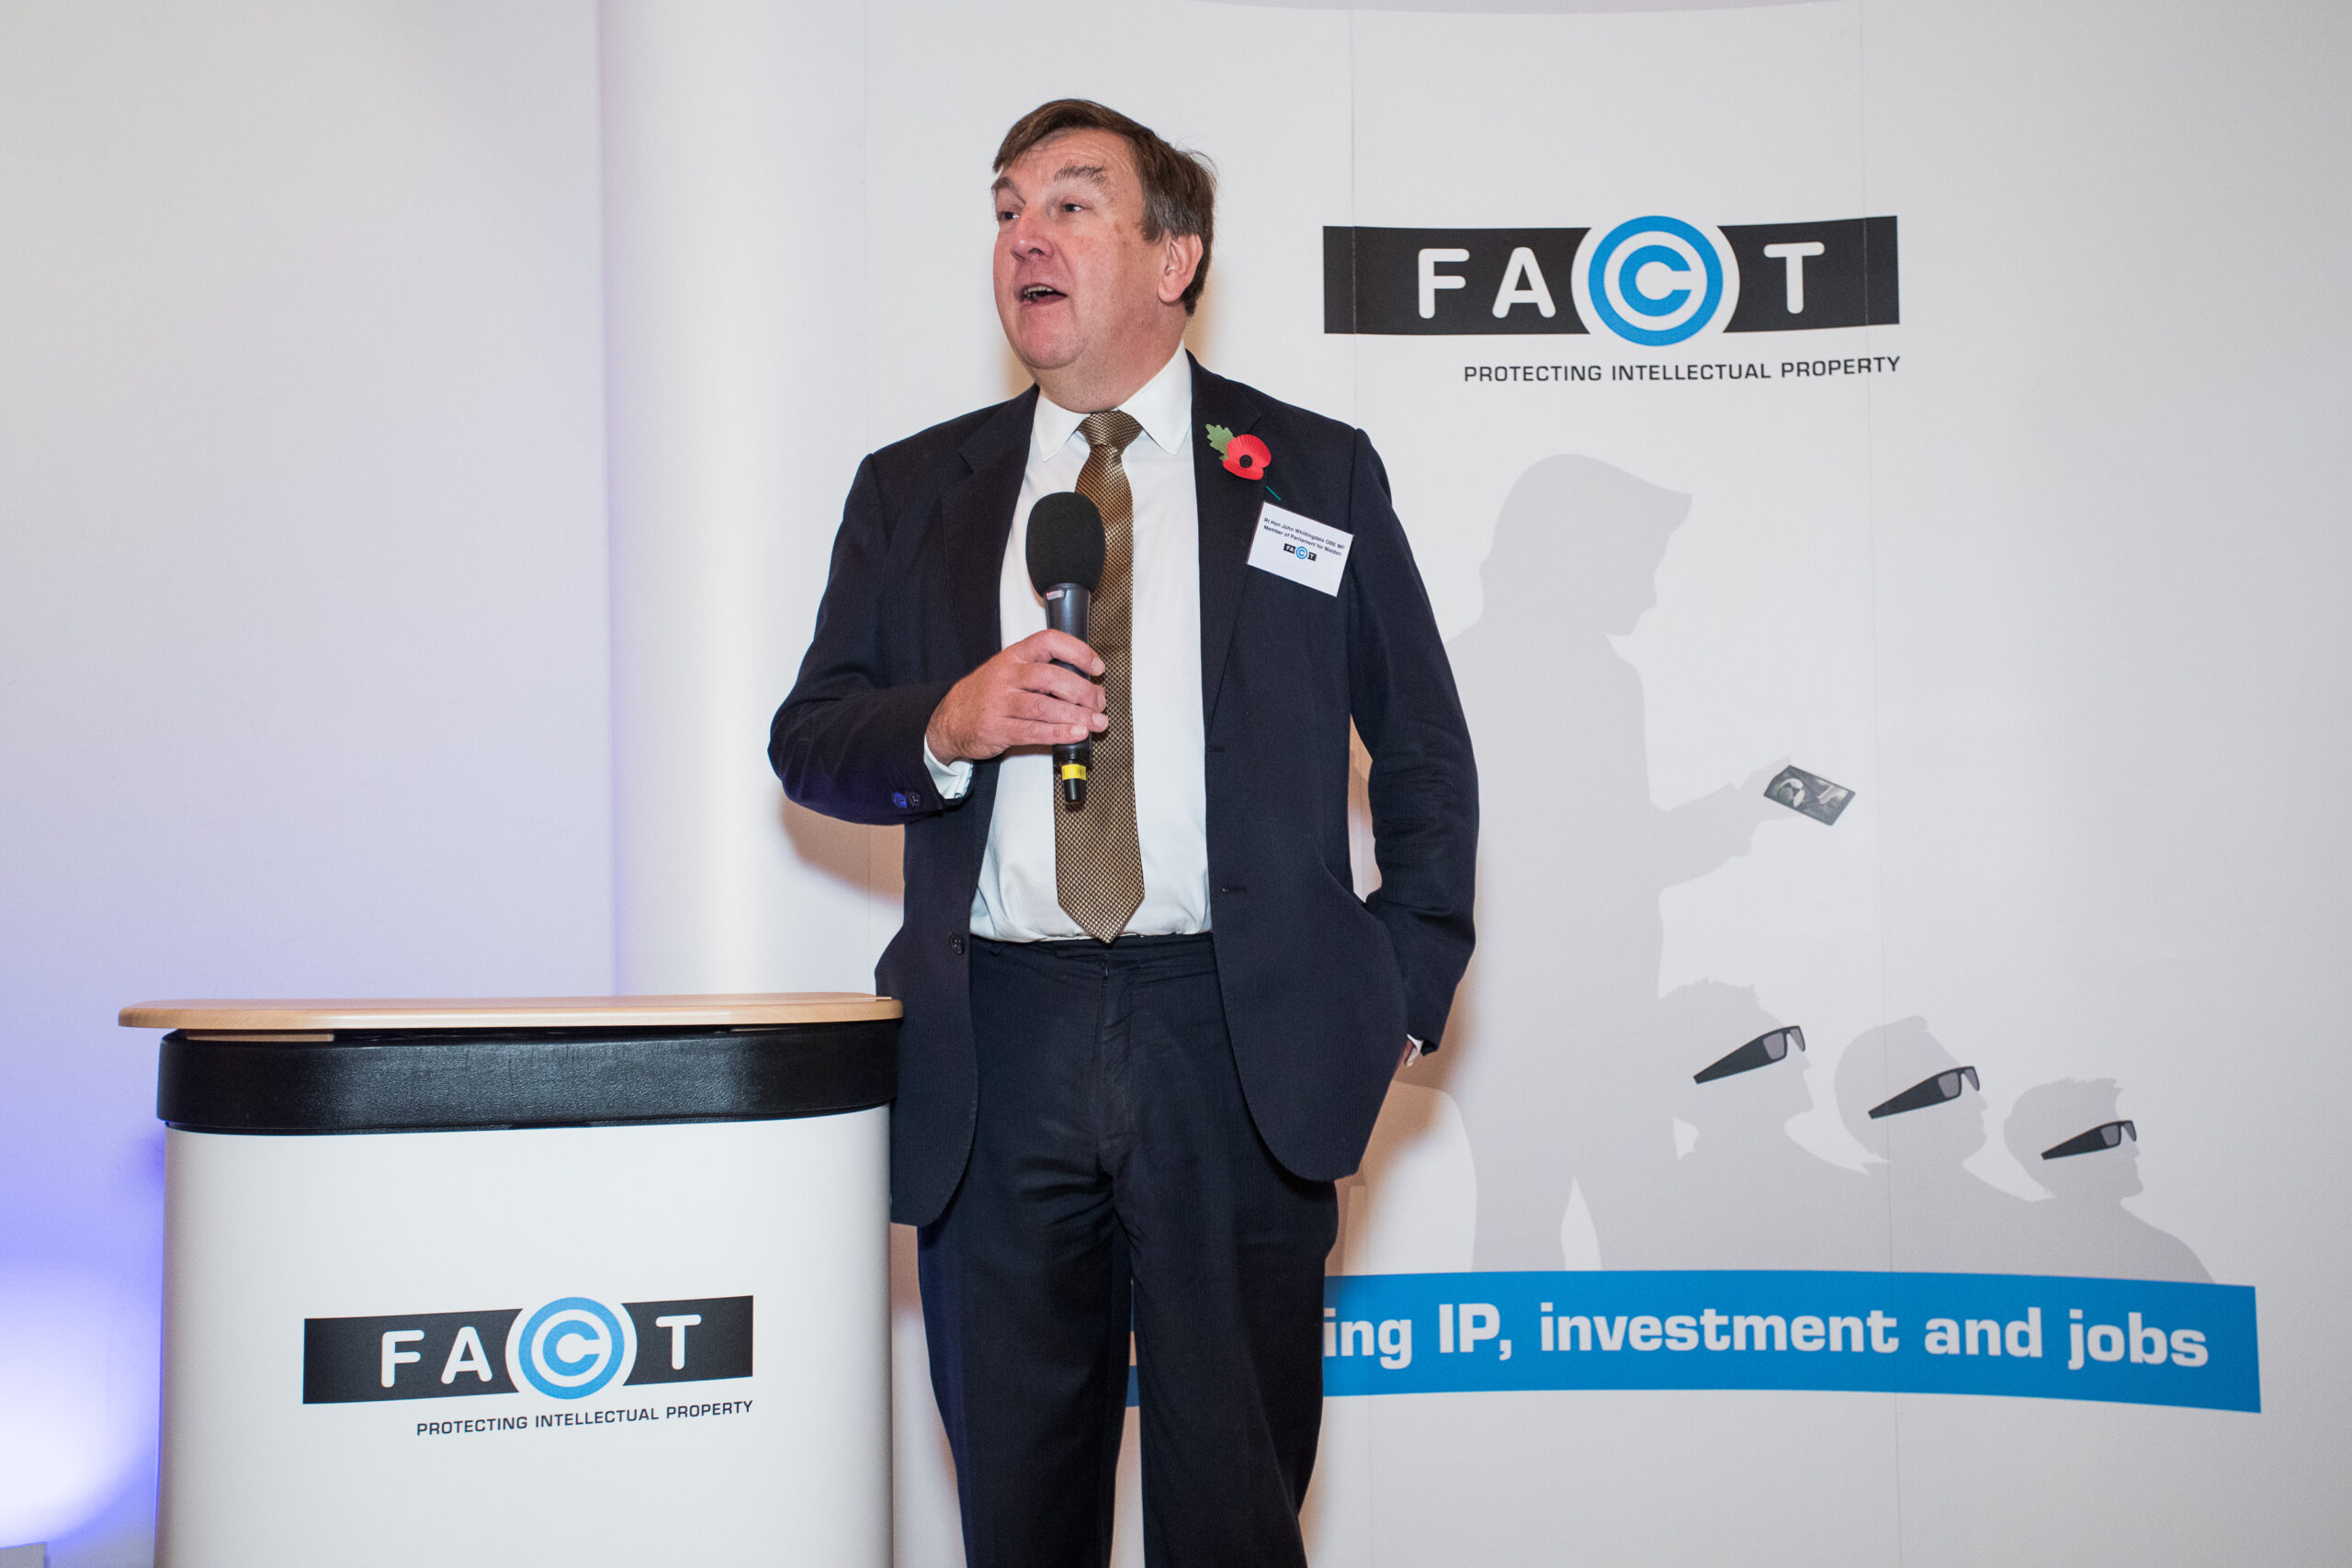 John Whittingdale at FACT Launch Event 2016